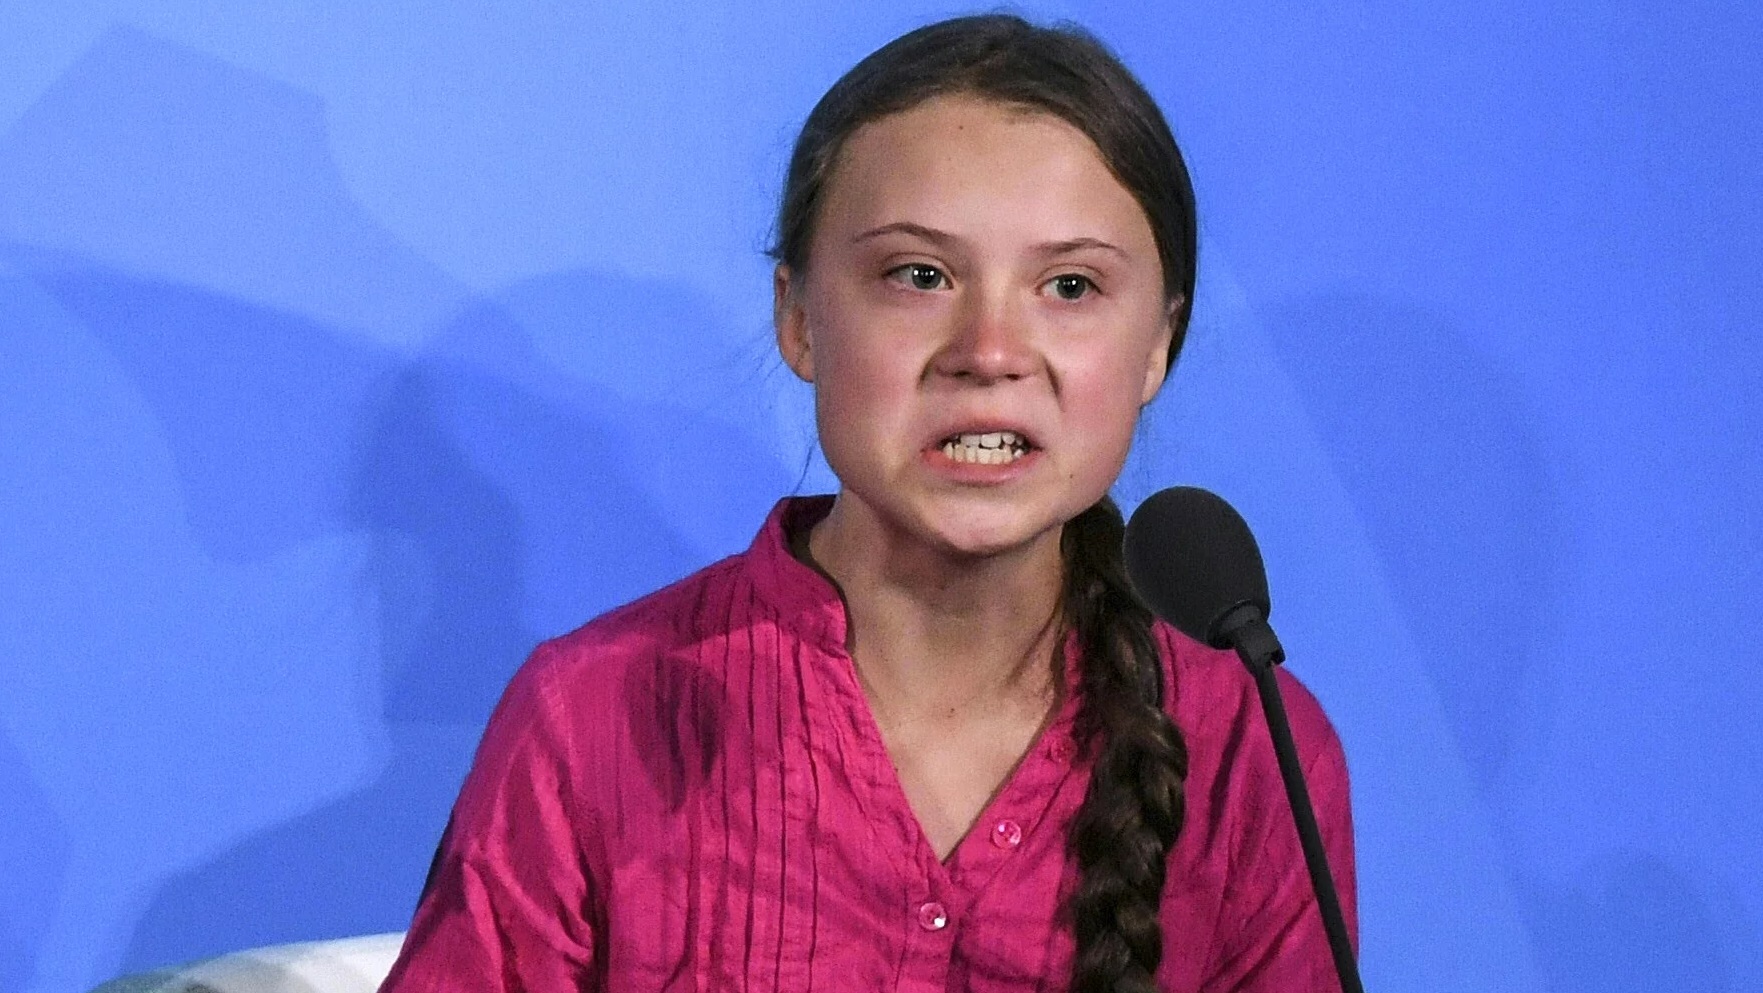 Image: Concerned citizens report Greta Thunberg’s parents to Child Services in Sweden for child abuse